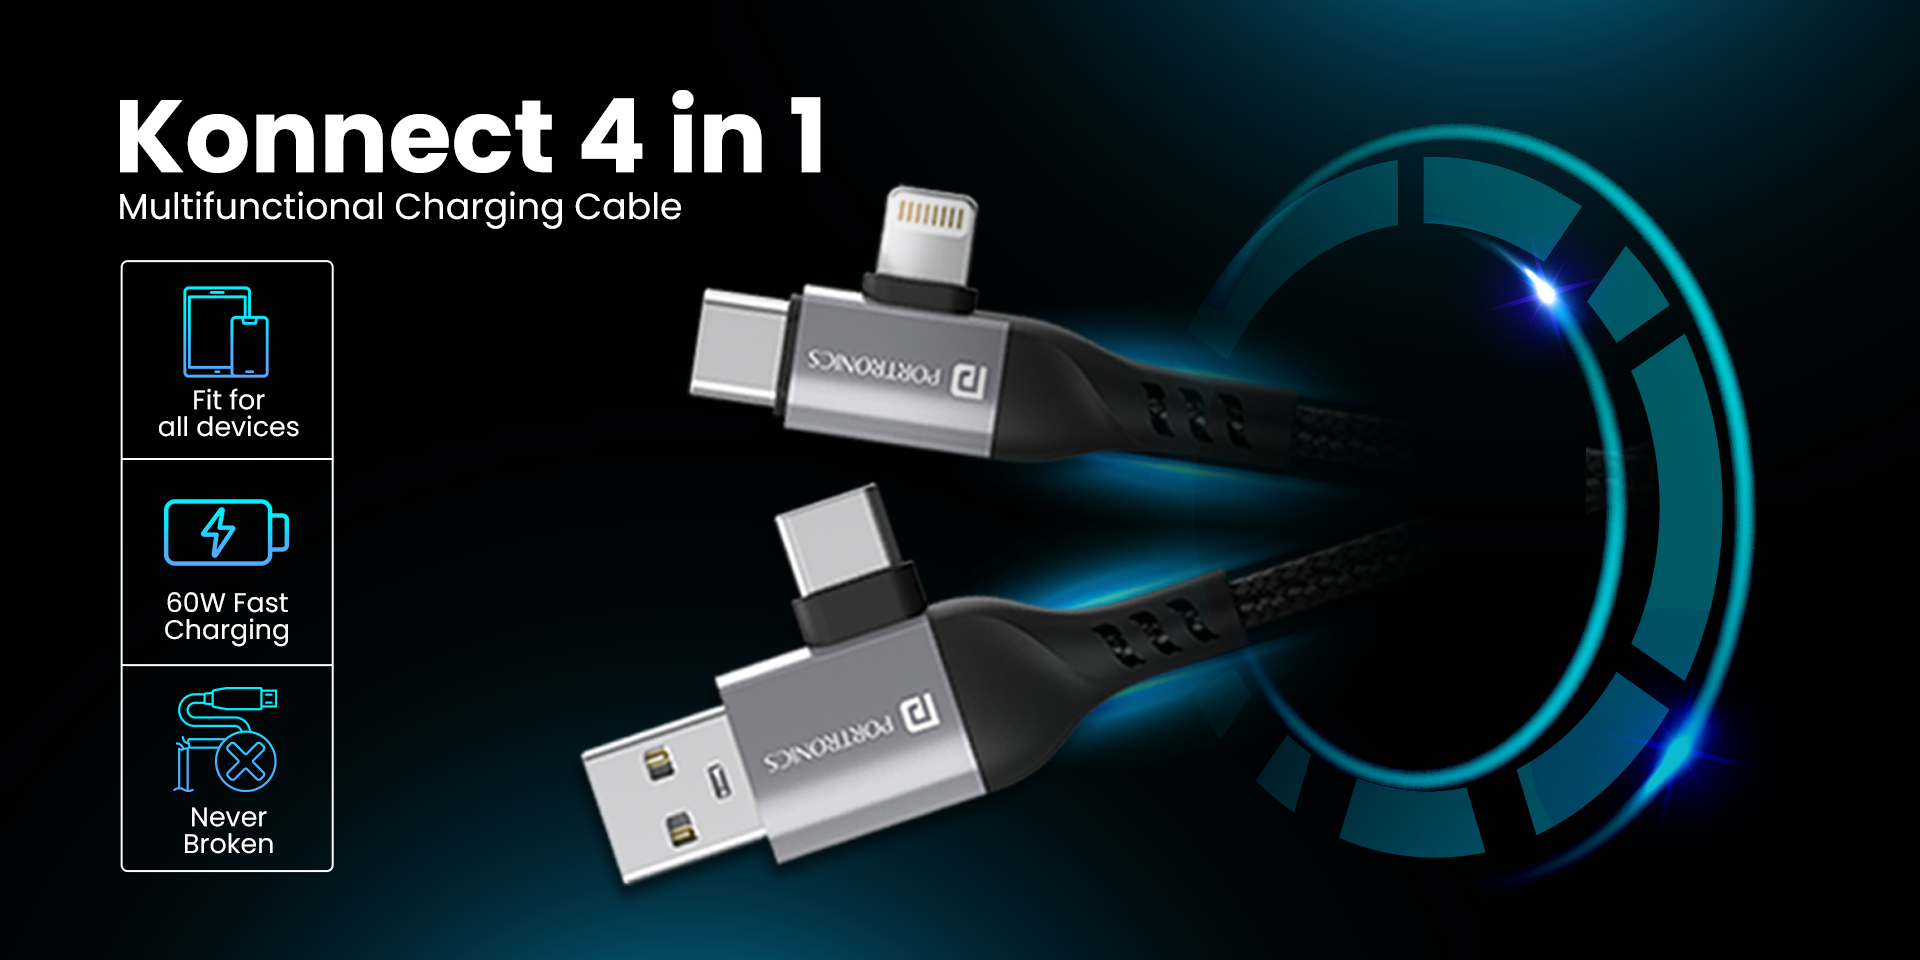 Portronics Konnect 4 in 1 cable with micro USB, iOS, & Type C fast charging cable